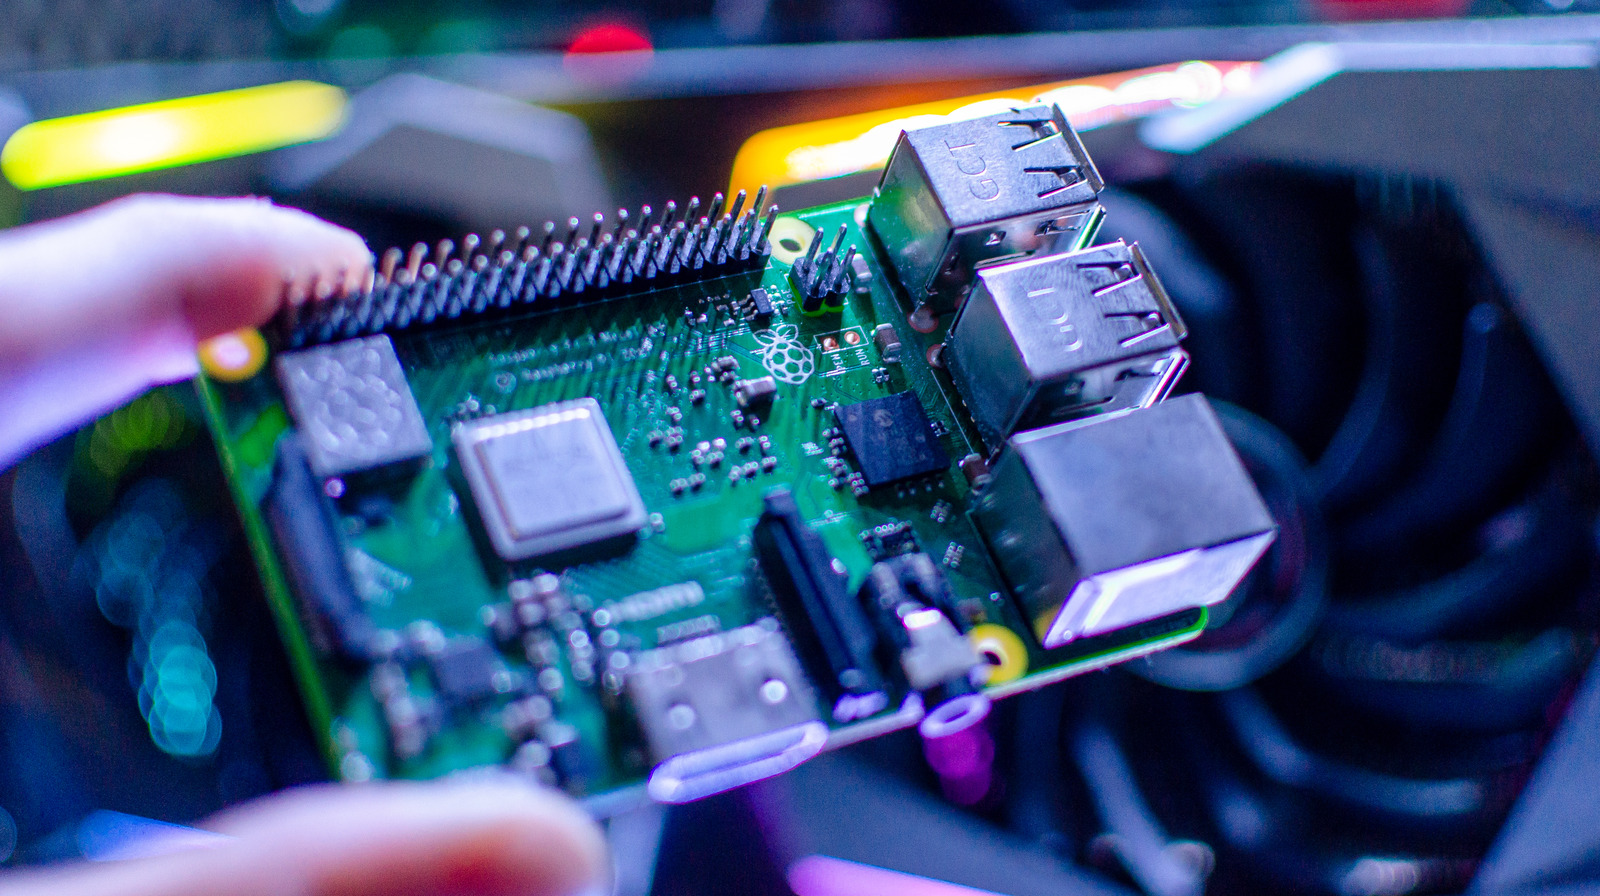 Don't Be Fooled By Raspberry Pi Money Making Schemes: Here's How To Spot Them